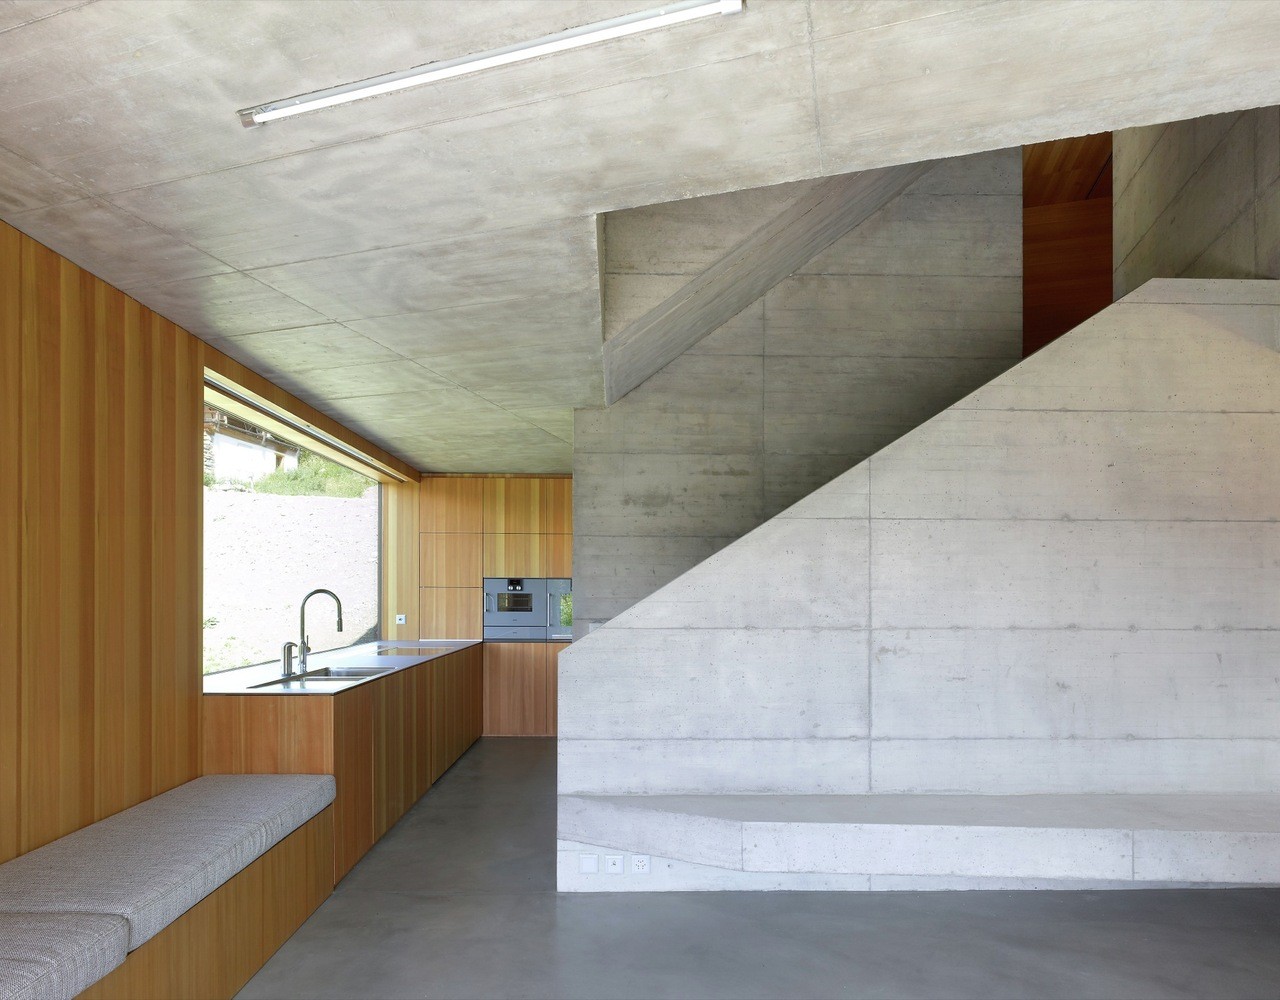 Concrete Cottage Covered with Wood Cladding in the Val d'Hérens (6)